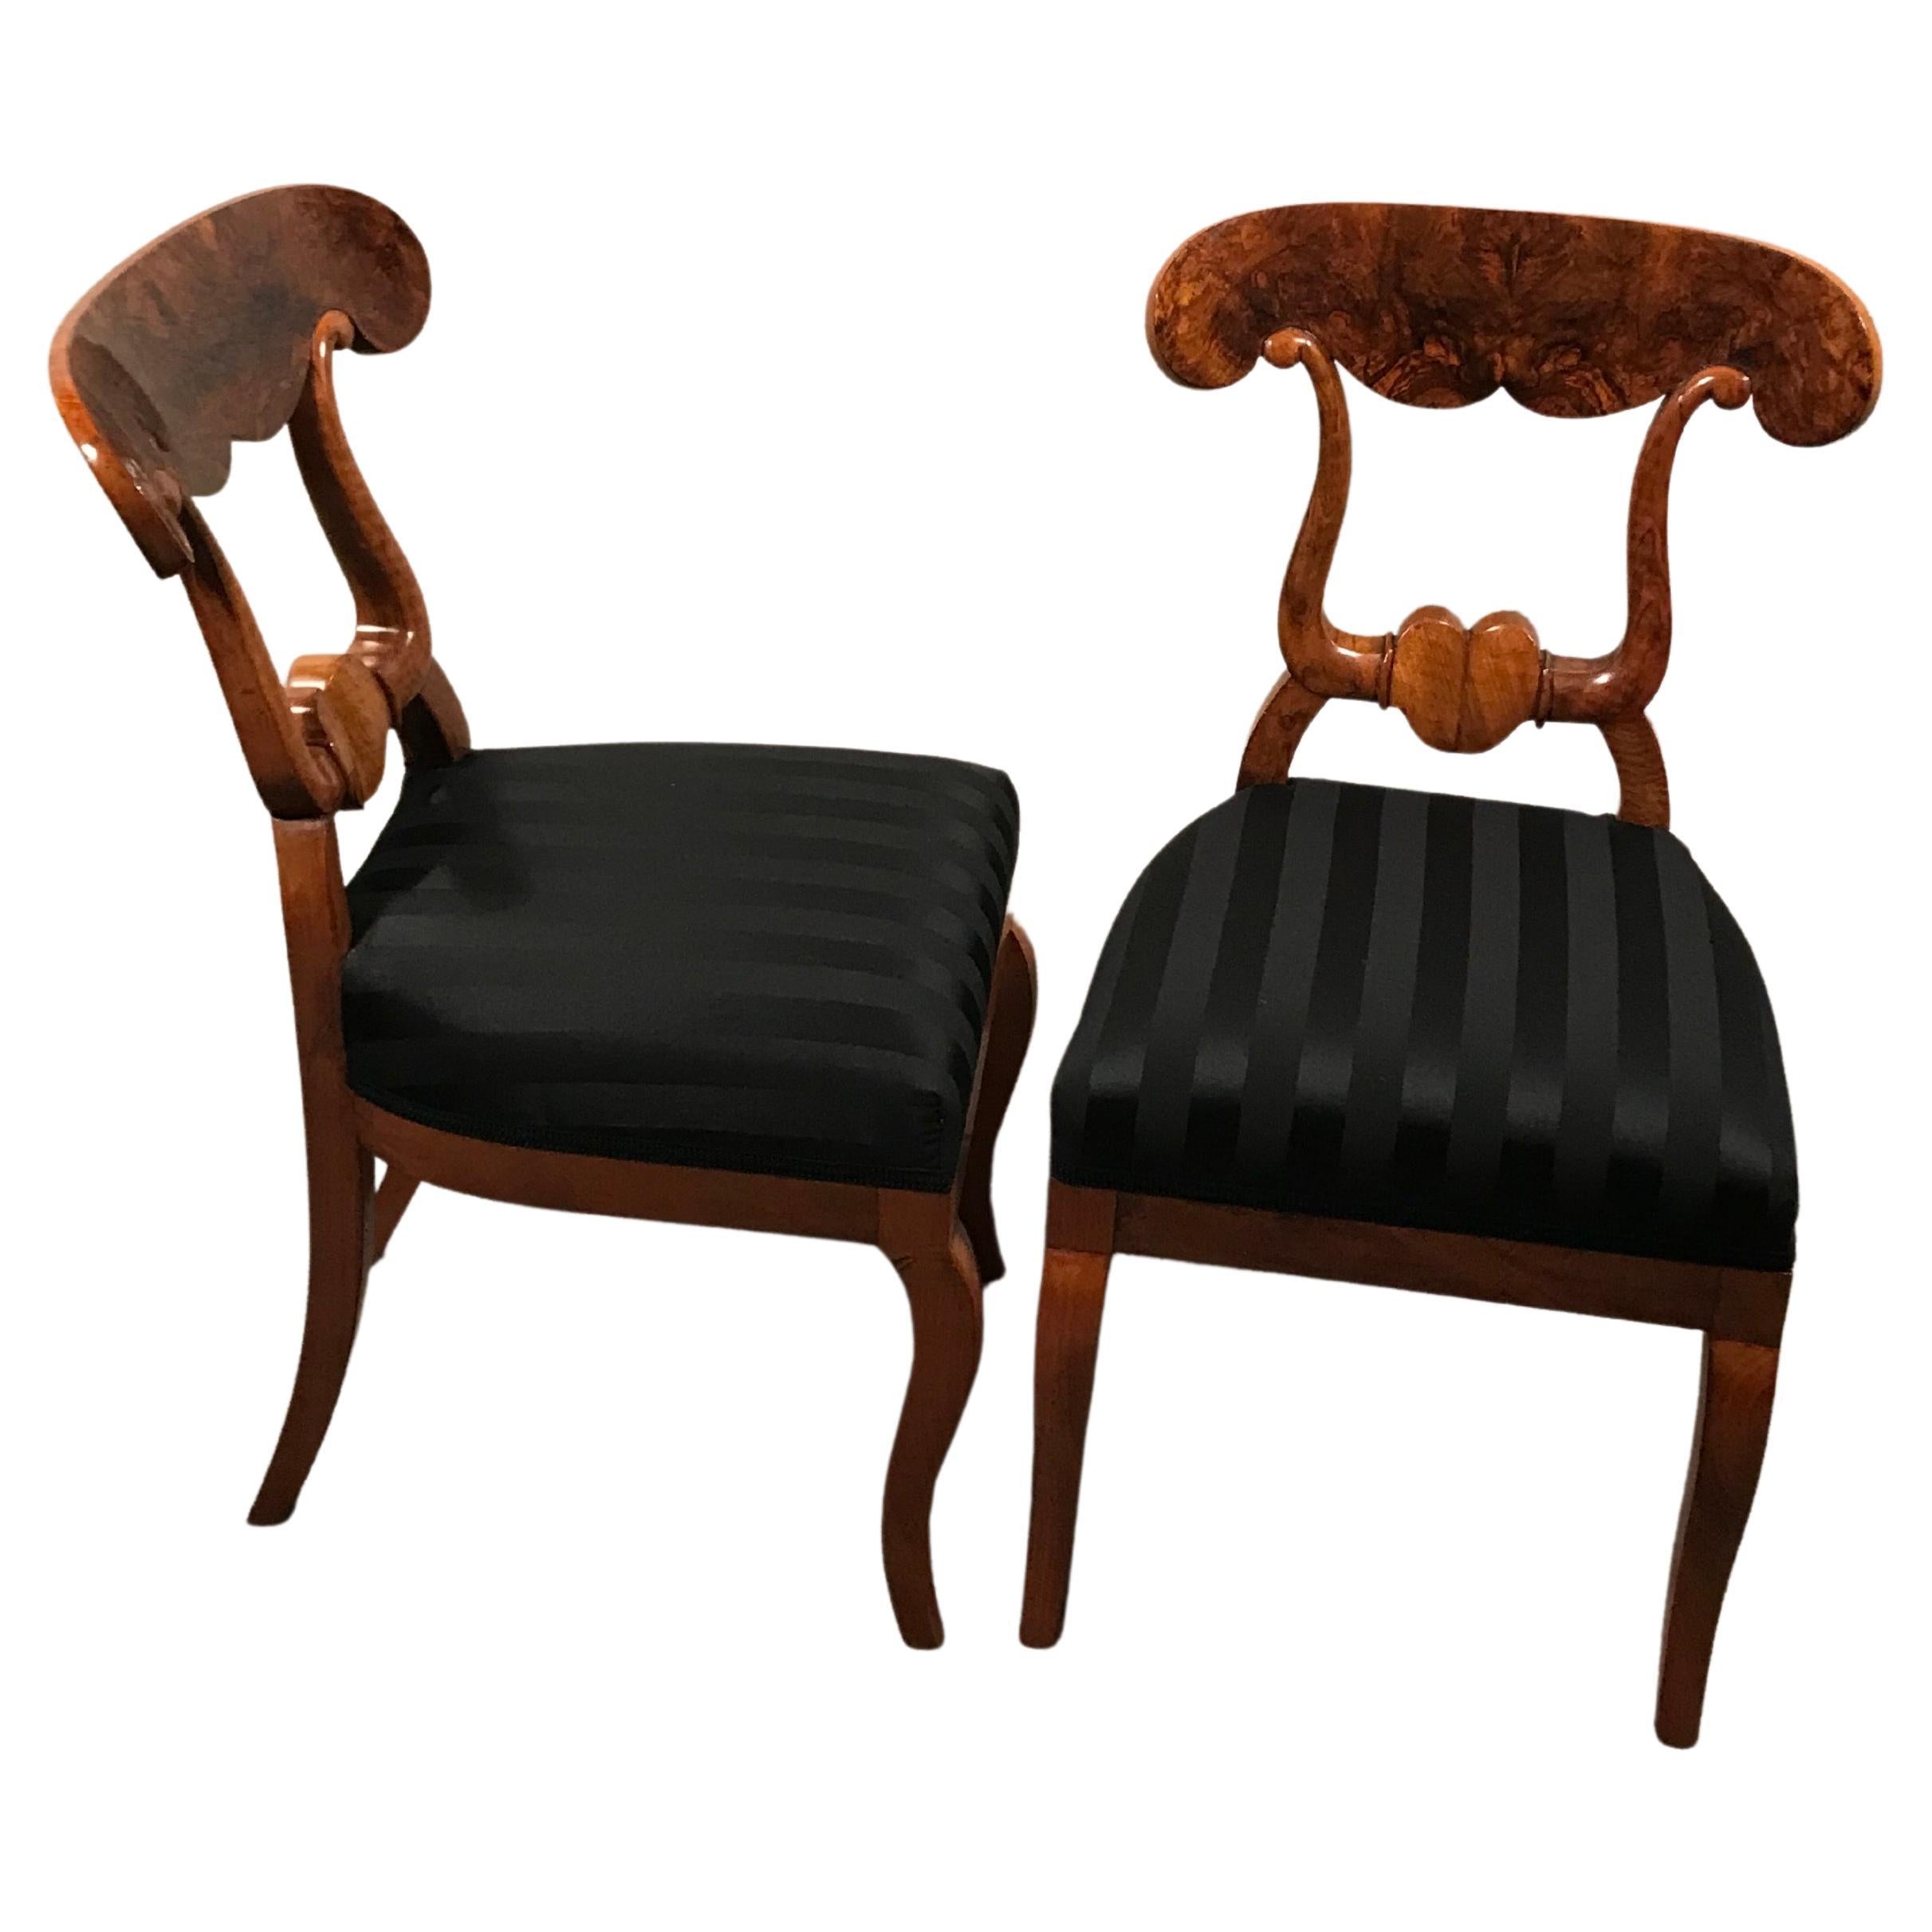 This exquisite set of 6 original Biedermeier chairs is a rare find. 
The so called original Biedermeier Ochsenkopf-Stuehle (ox-head chairs) get their name from their beautifully designed back. They date back to around 1820 and come from Southern